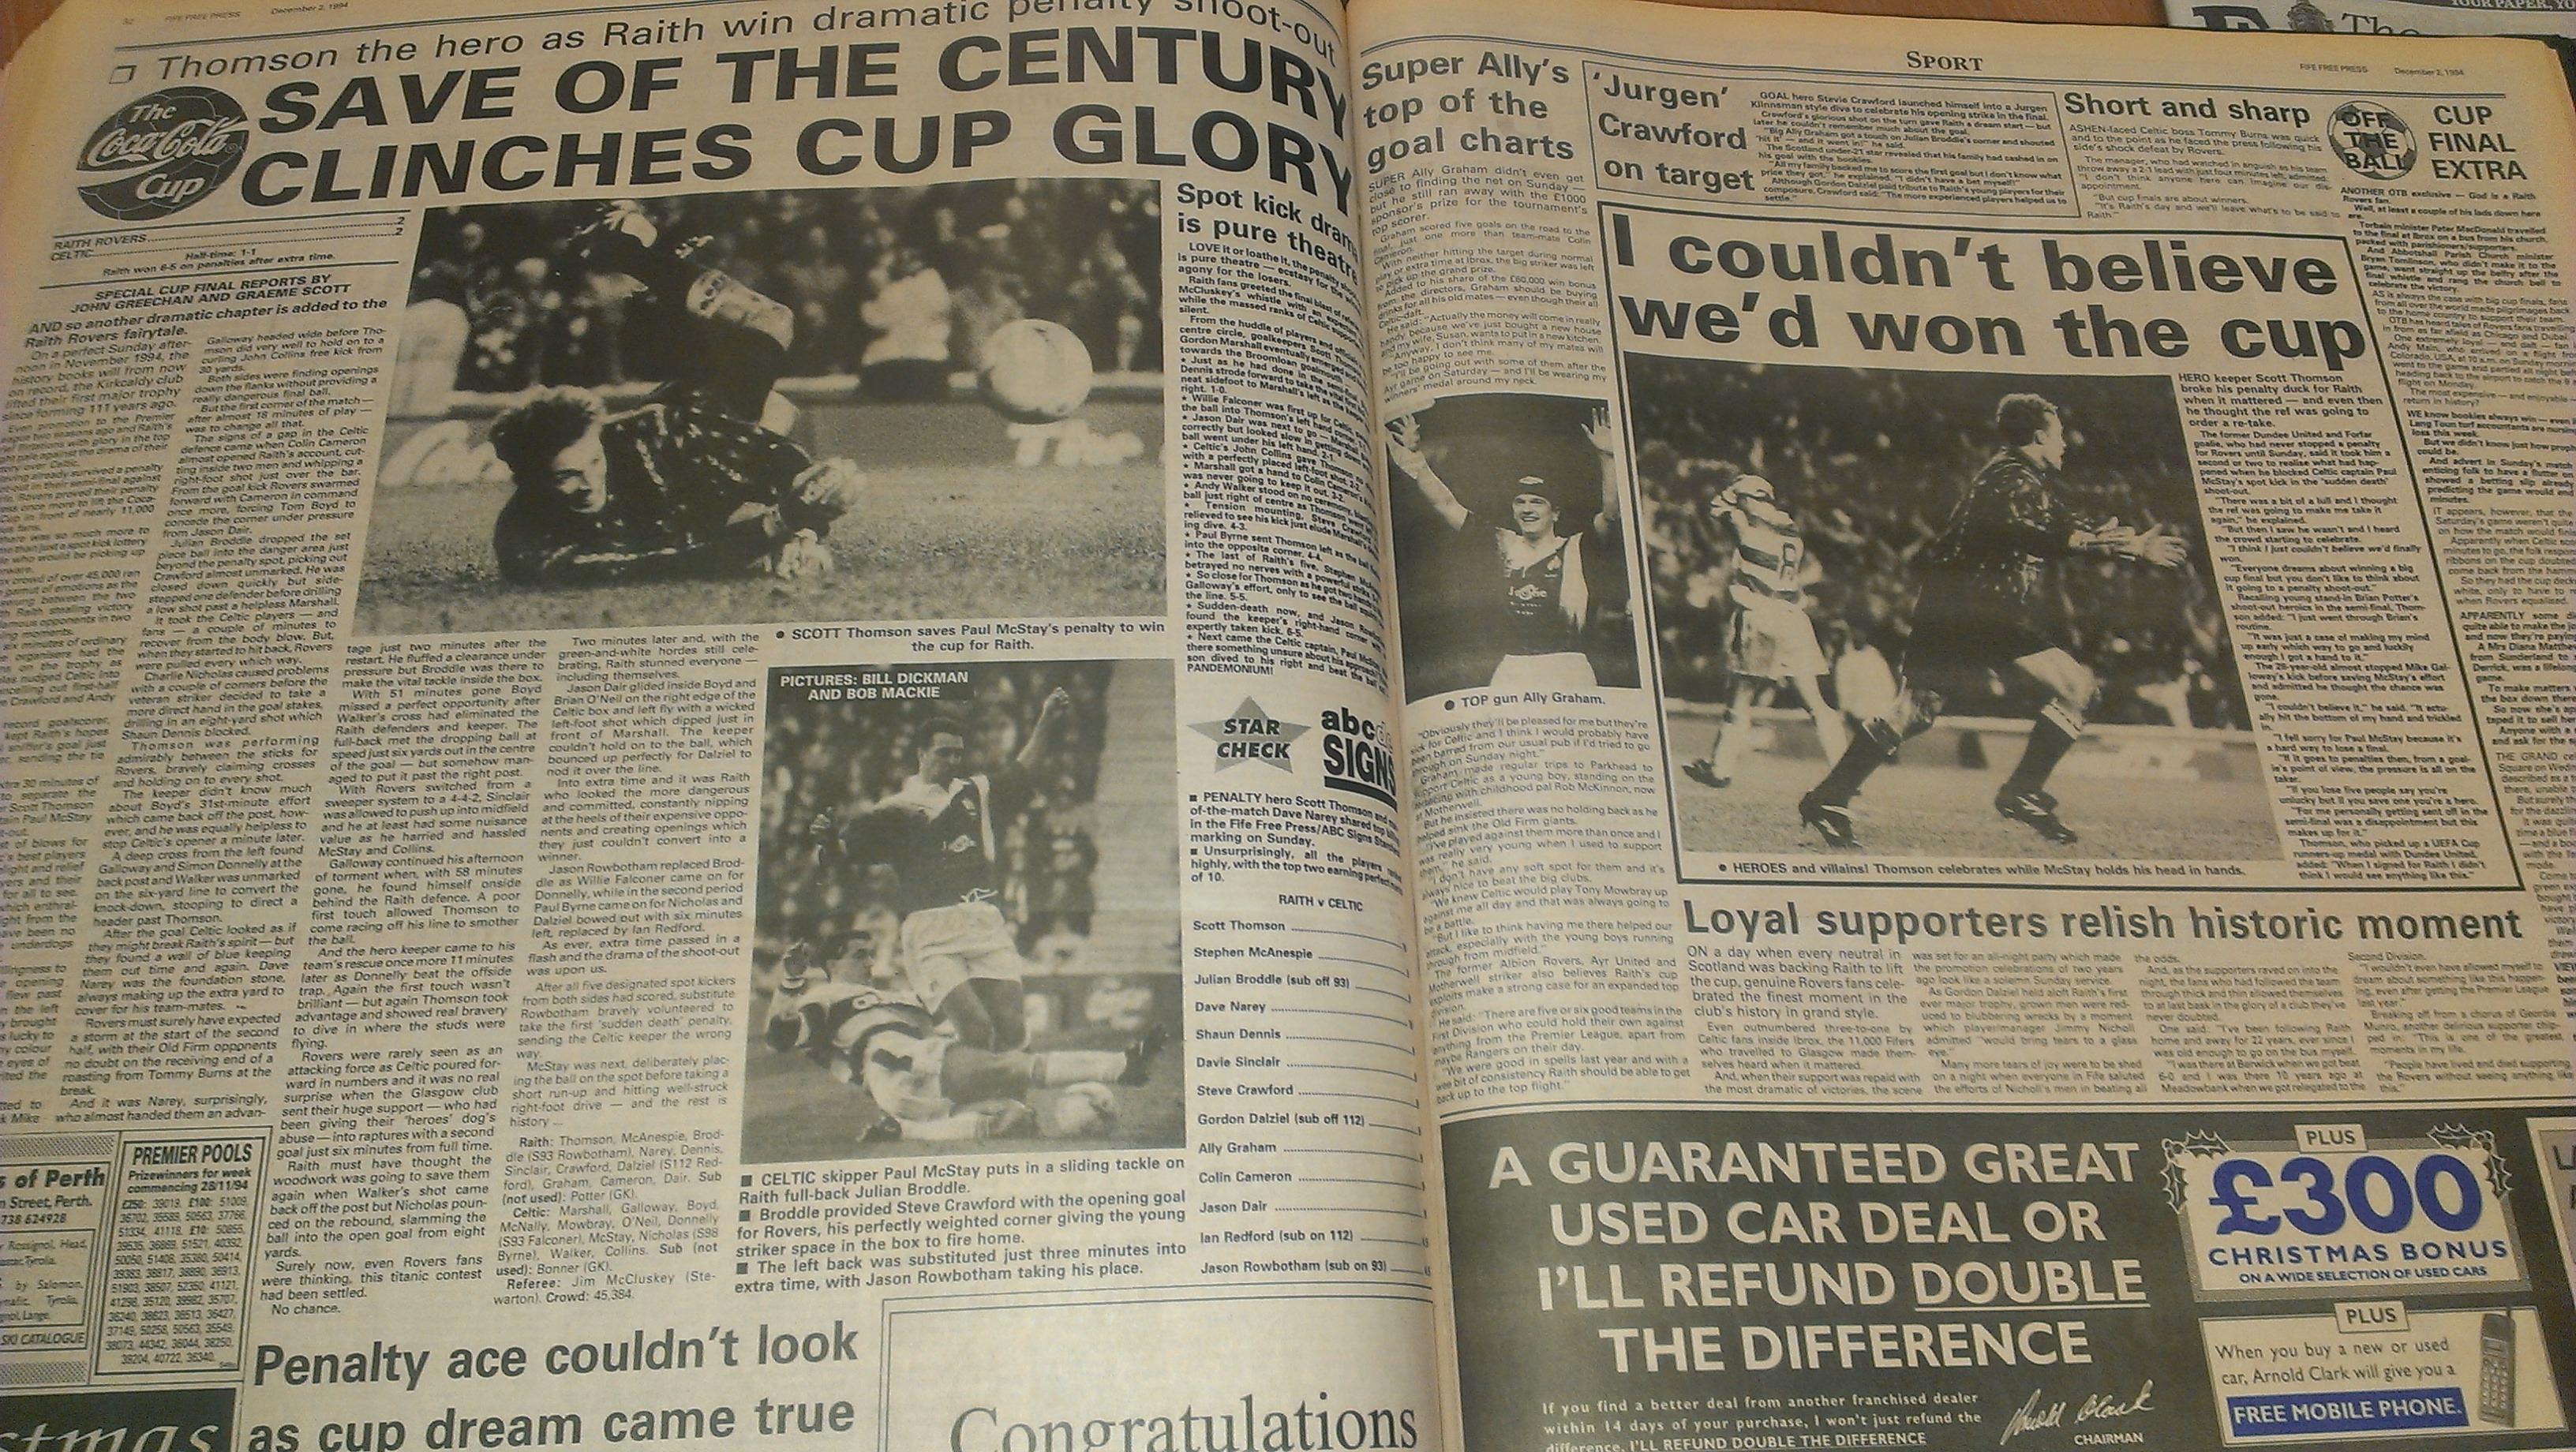 Raith Rovers Coca Cola Cup - match  report of the Fife Free Press 1994